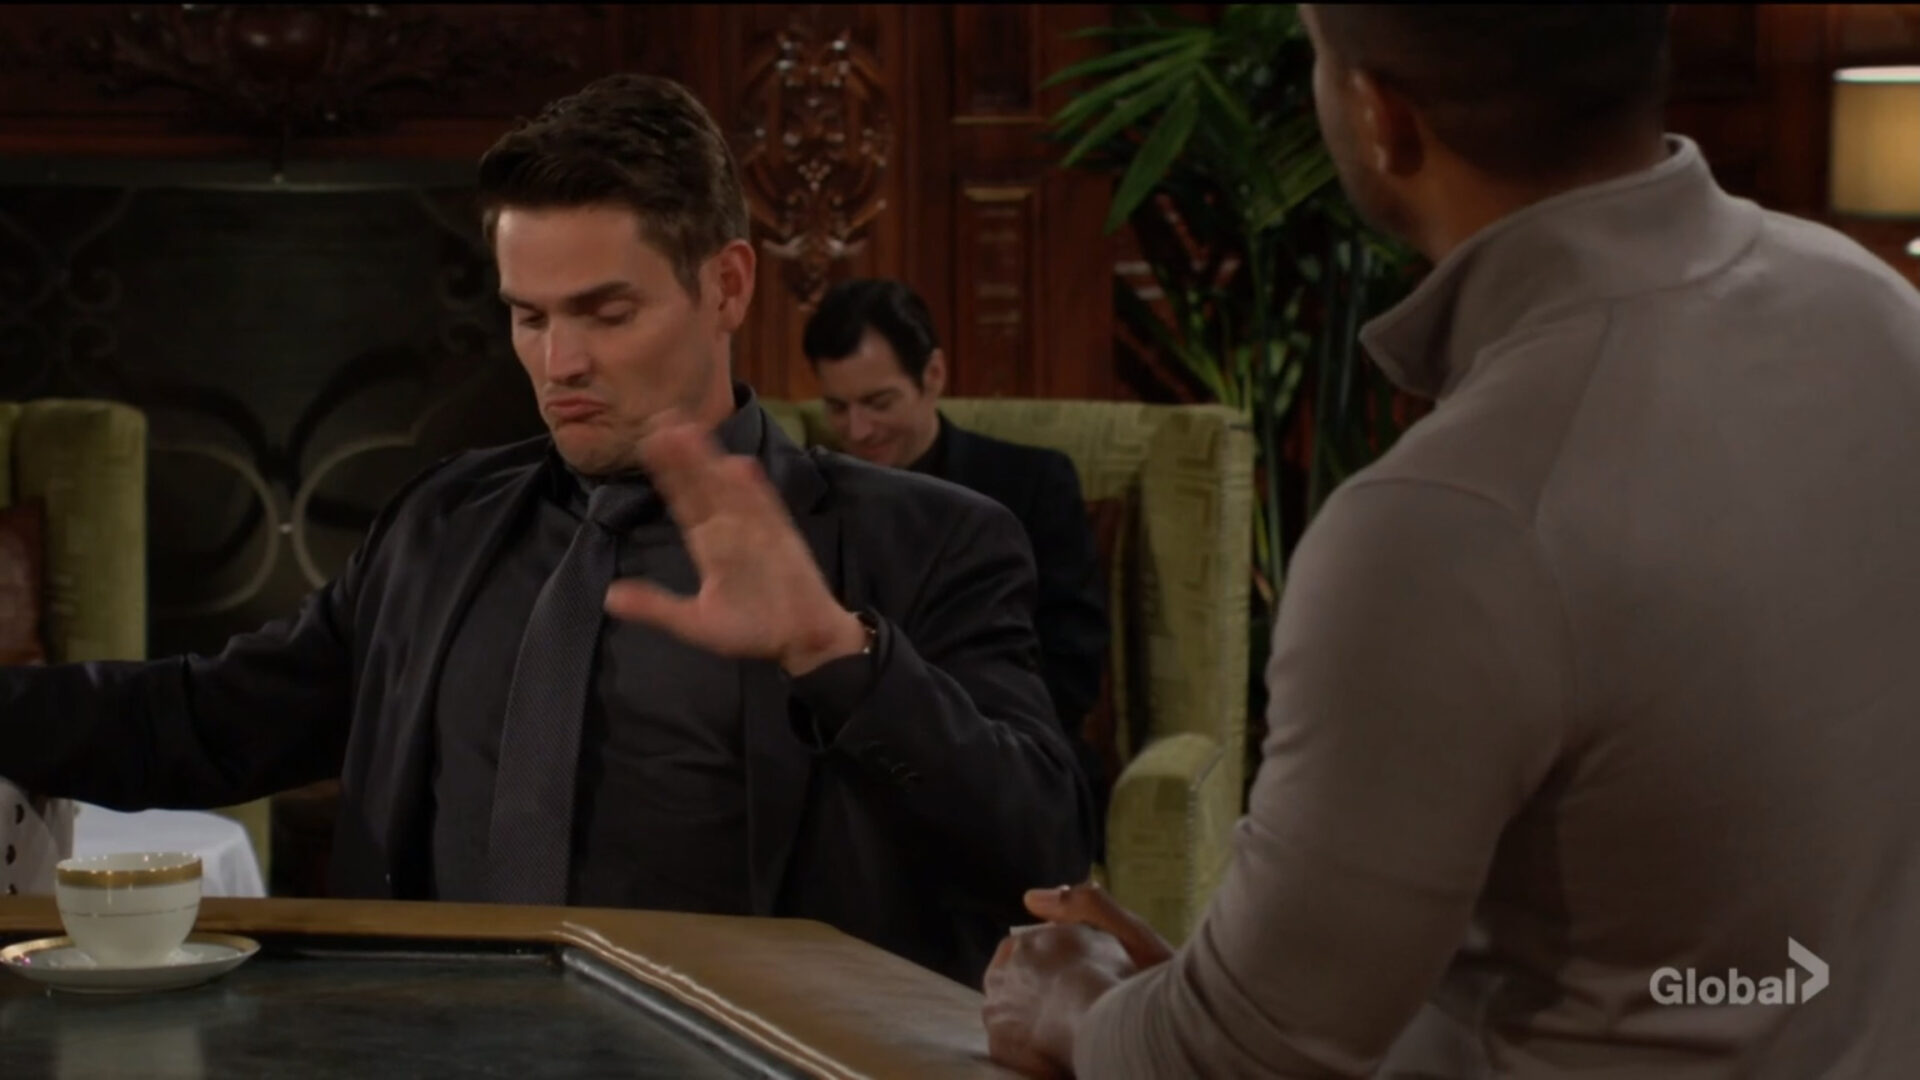 adam taunts nate about dry cleaning Y&R